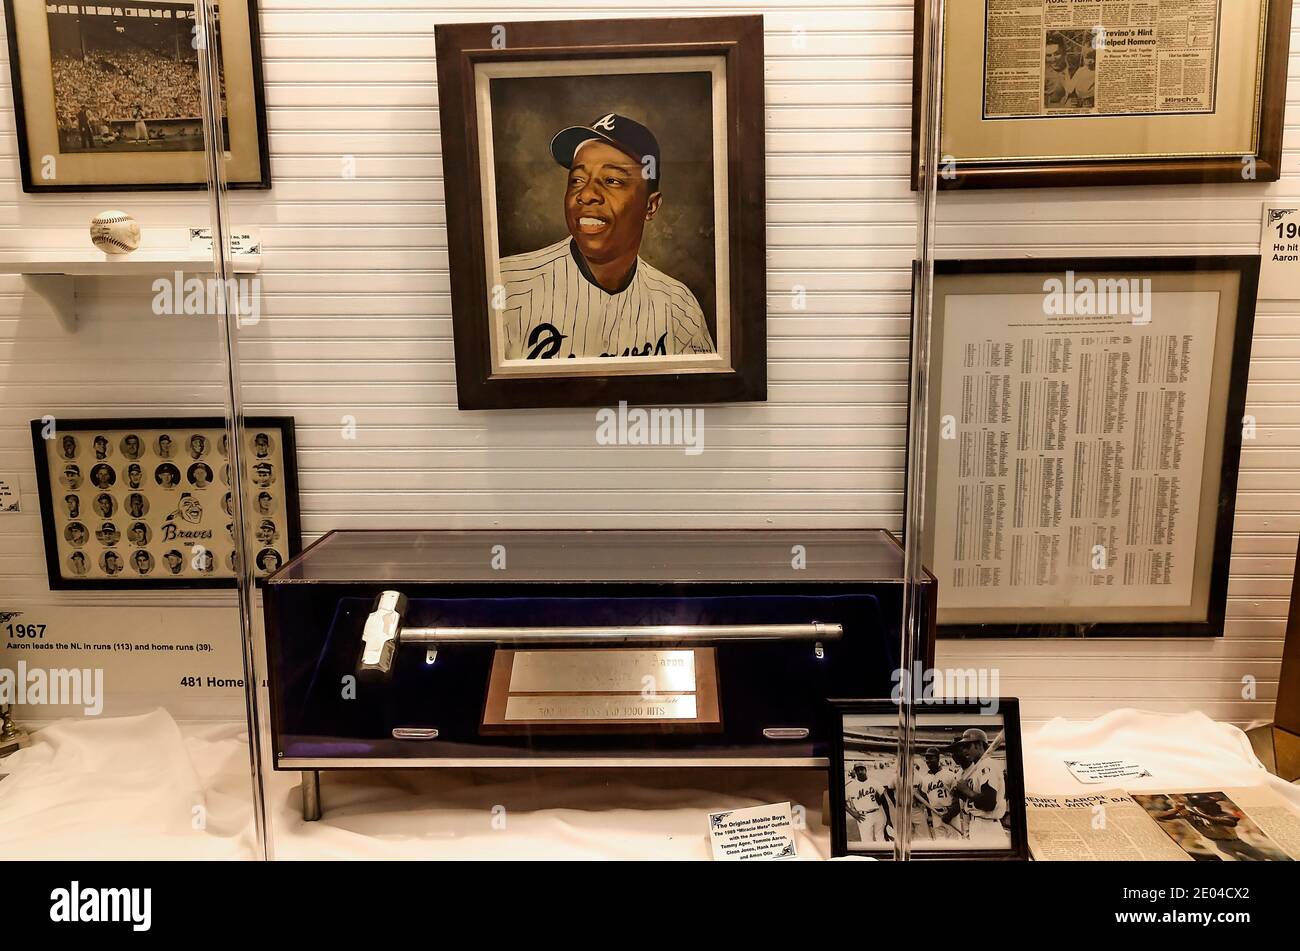 The Hank Aaron Childhood Home and Museum displays memorabilia from the baseball player’s life, Aug. 23, 2017, in Mobile, Alabama. Stock Photo